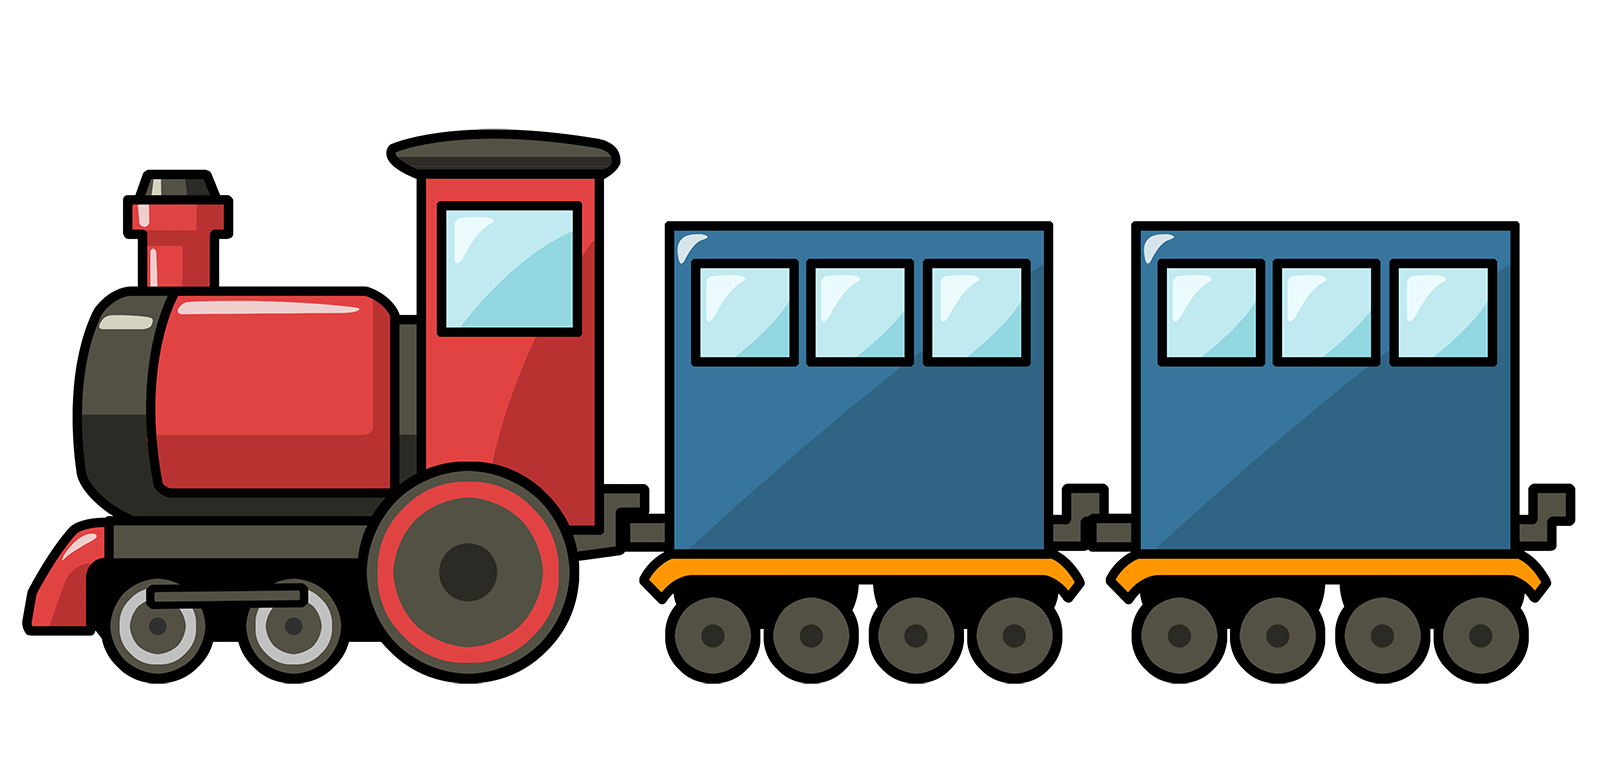 Rolling Stock